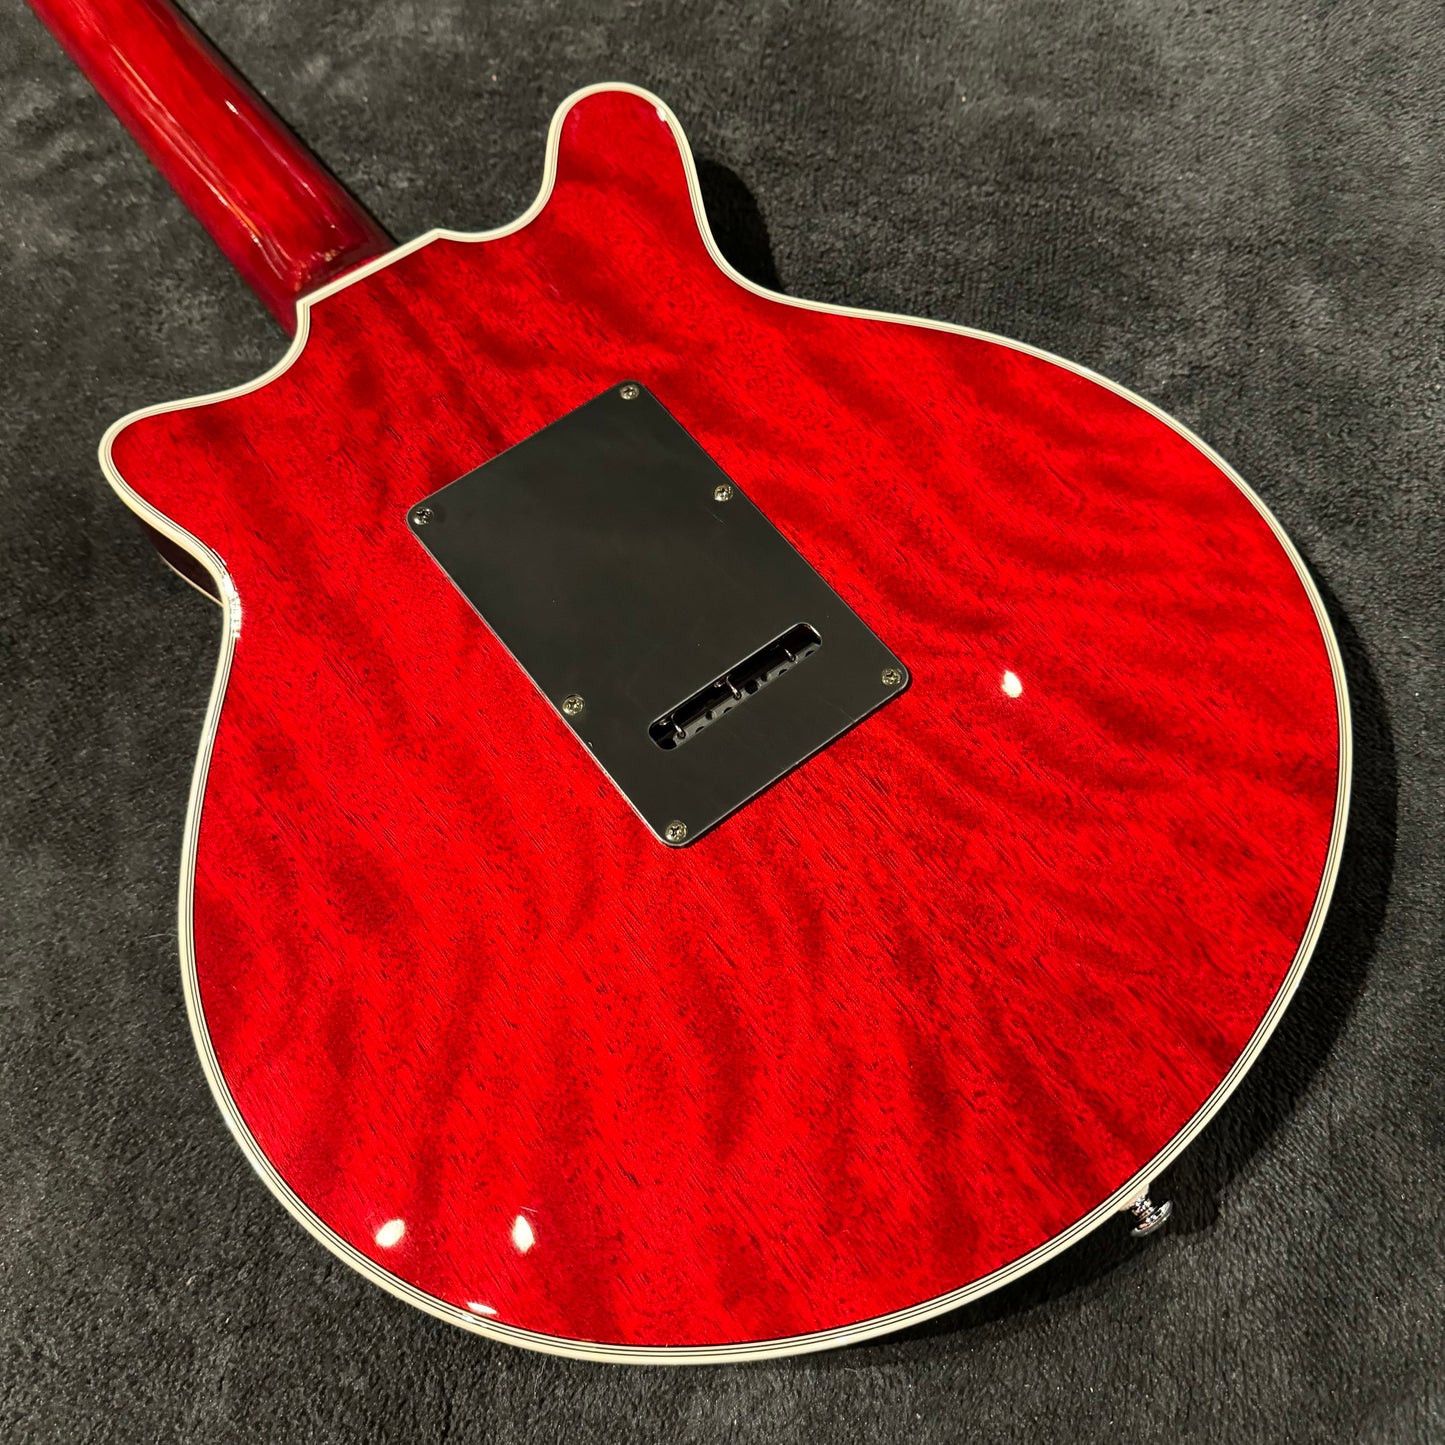 BMG Brian May Red Special